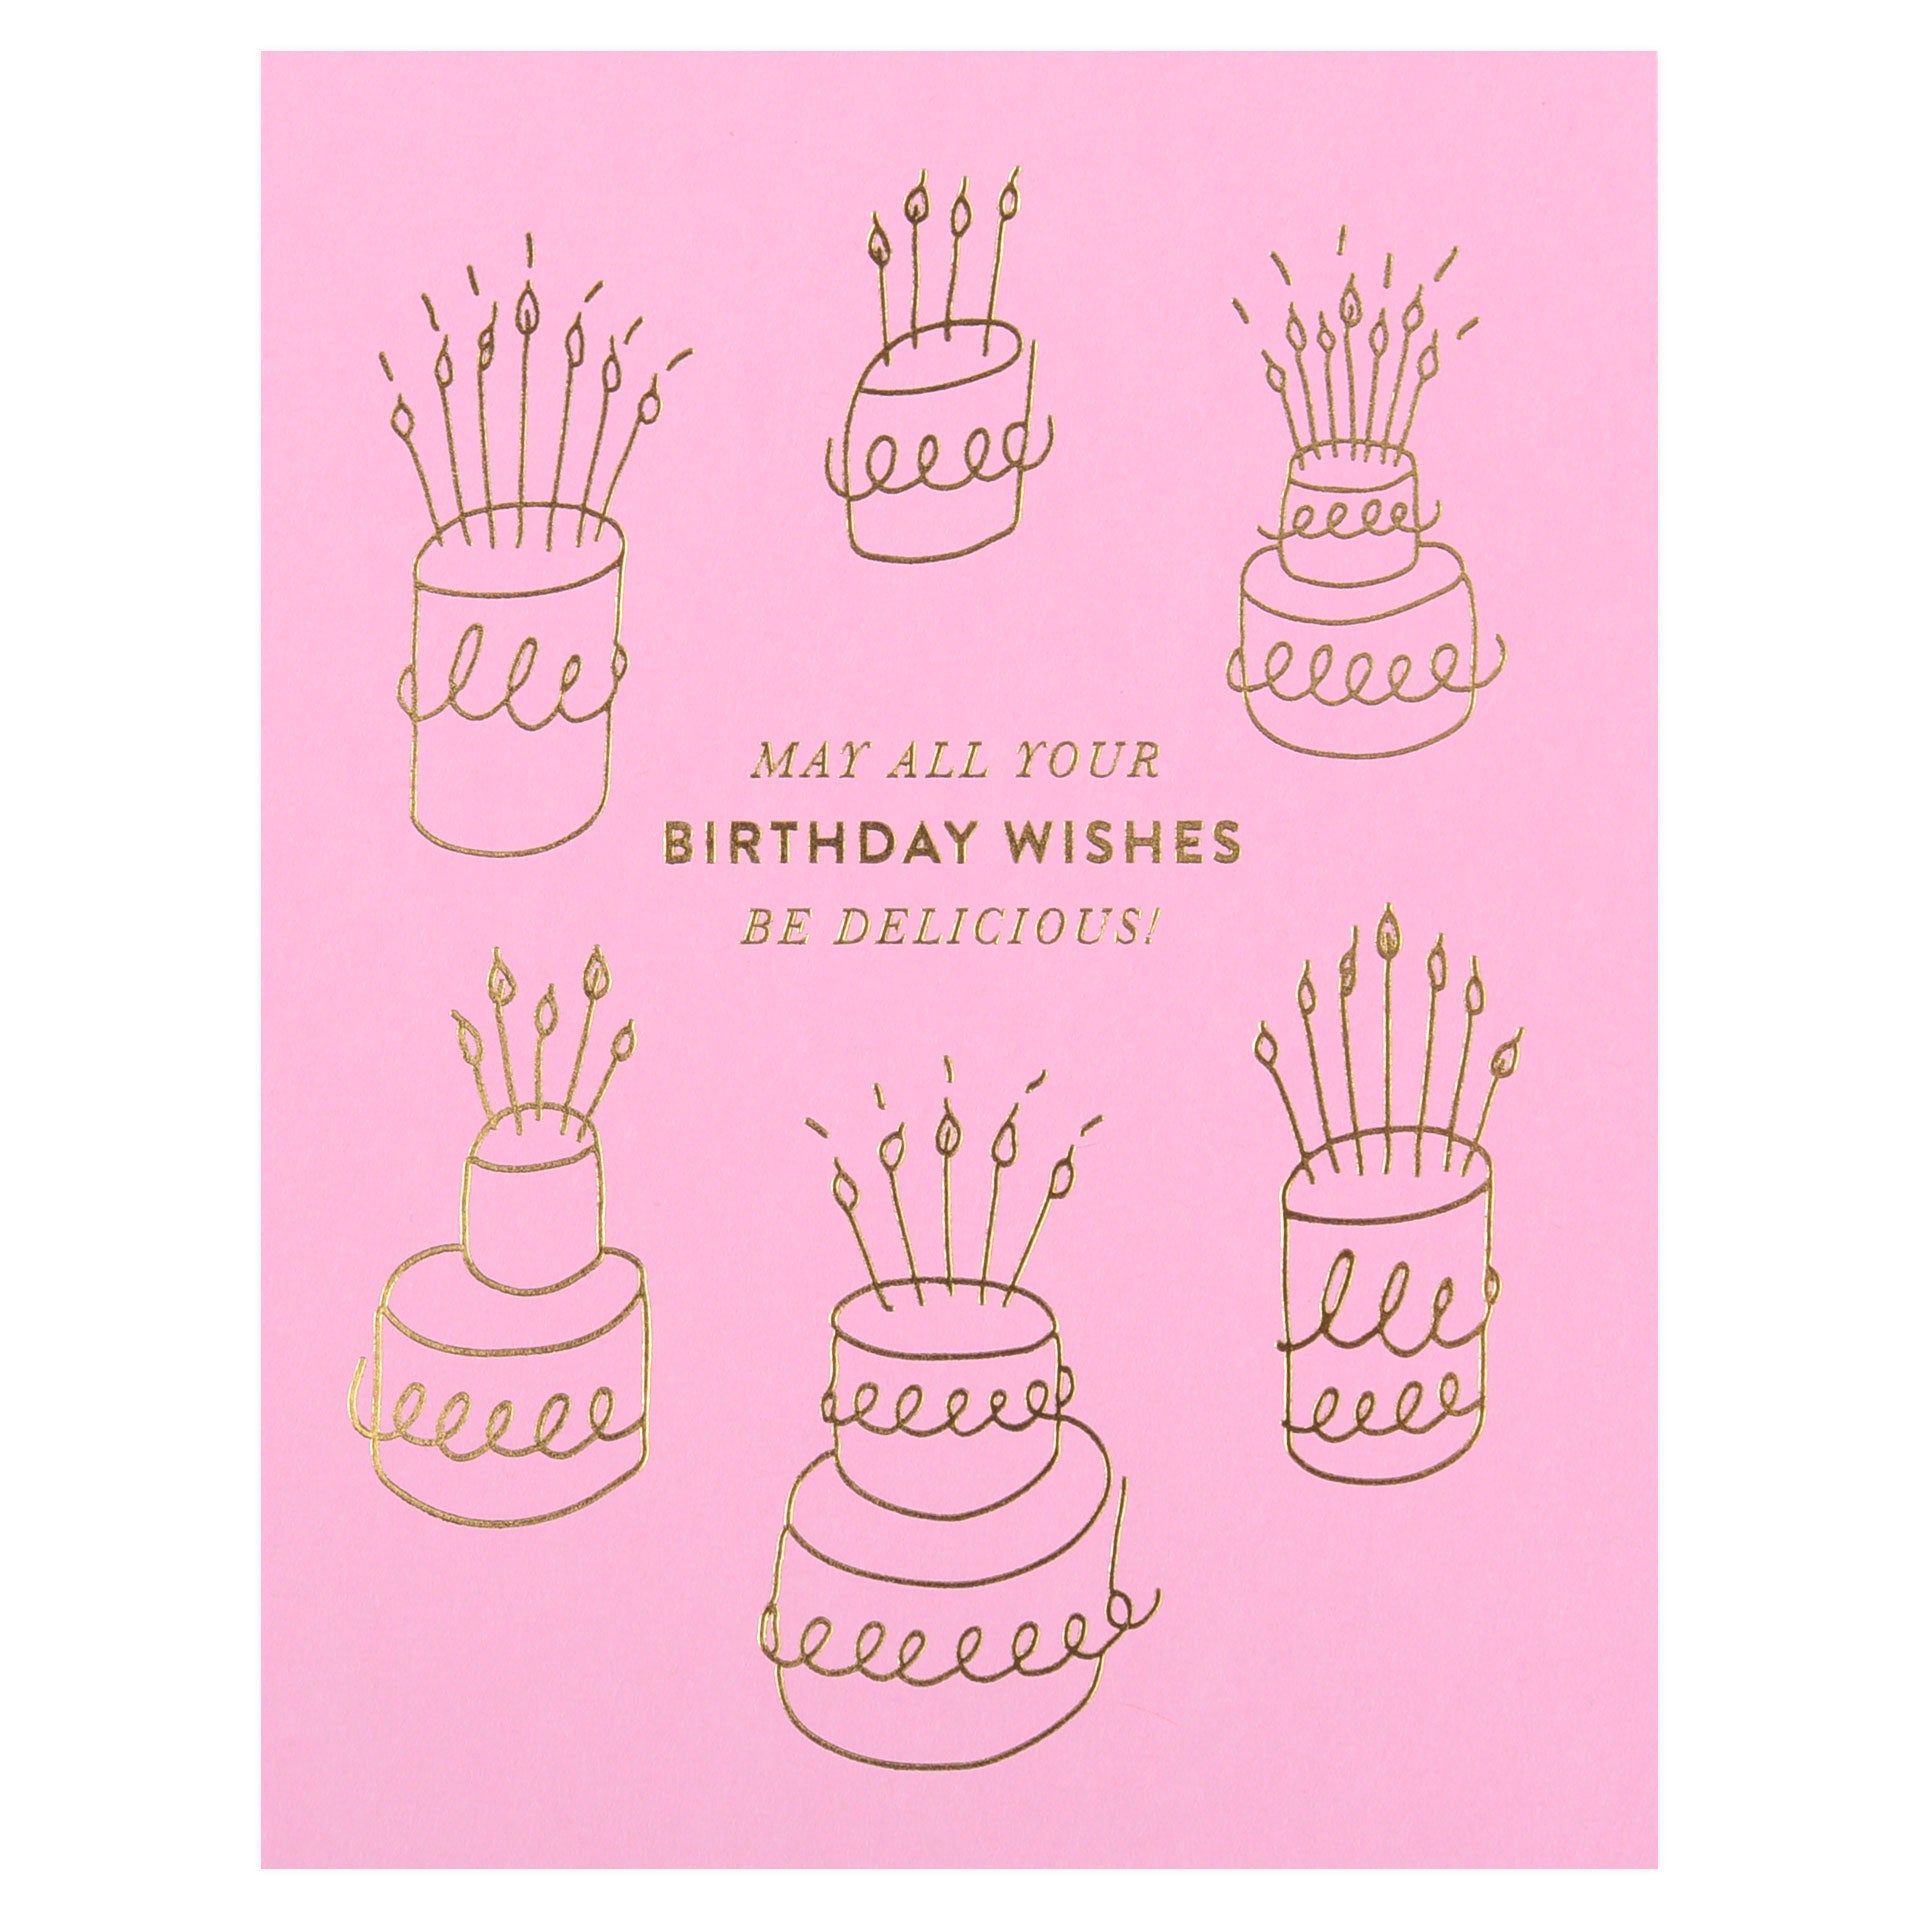 The Social Type Delicious Birthday Card 